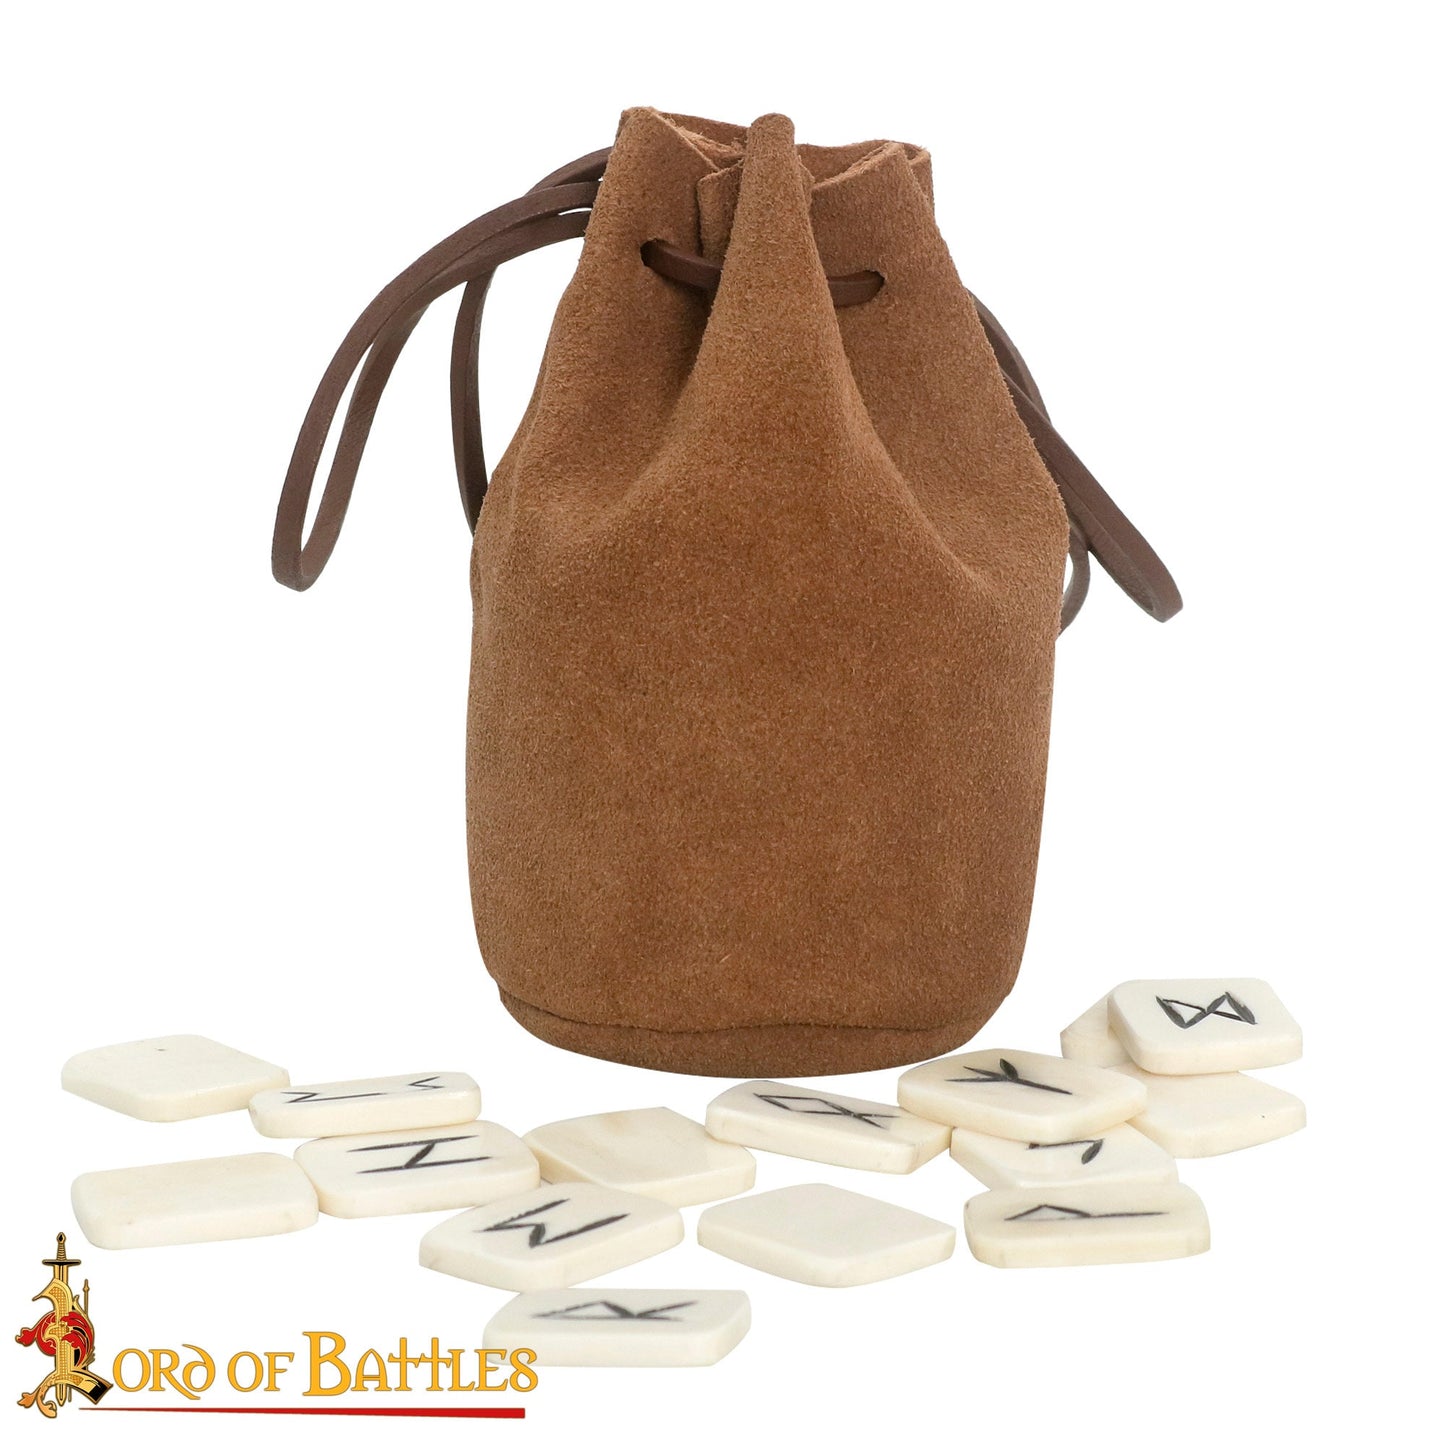 Gaming Runes with a Leather Bag